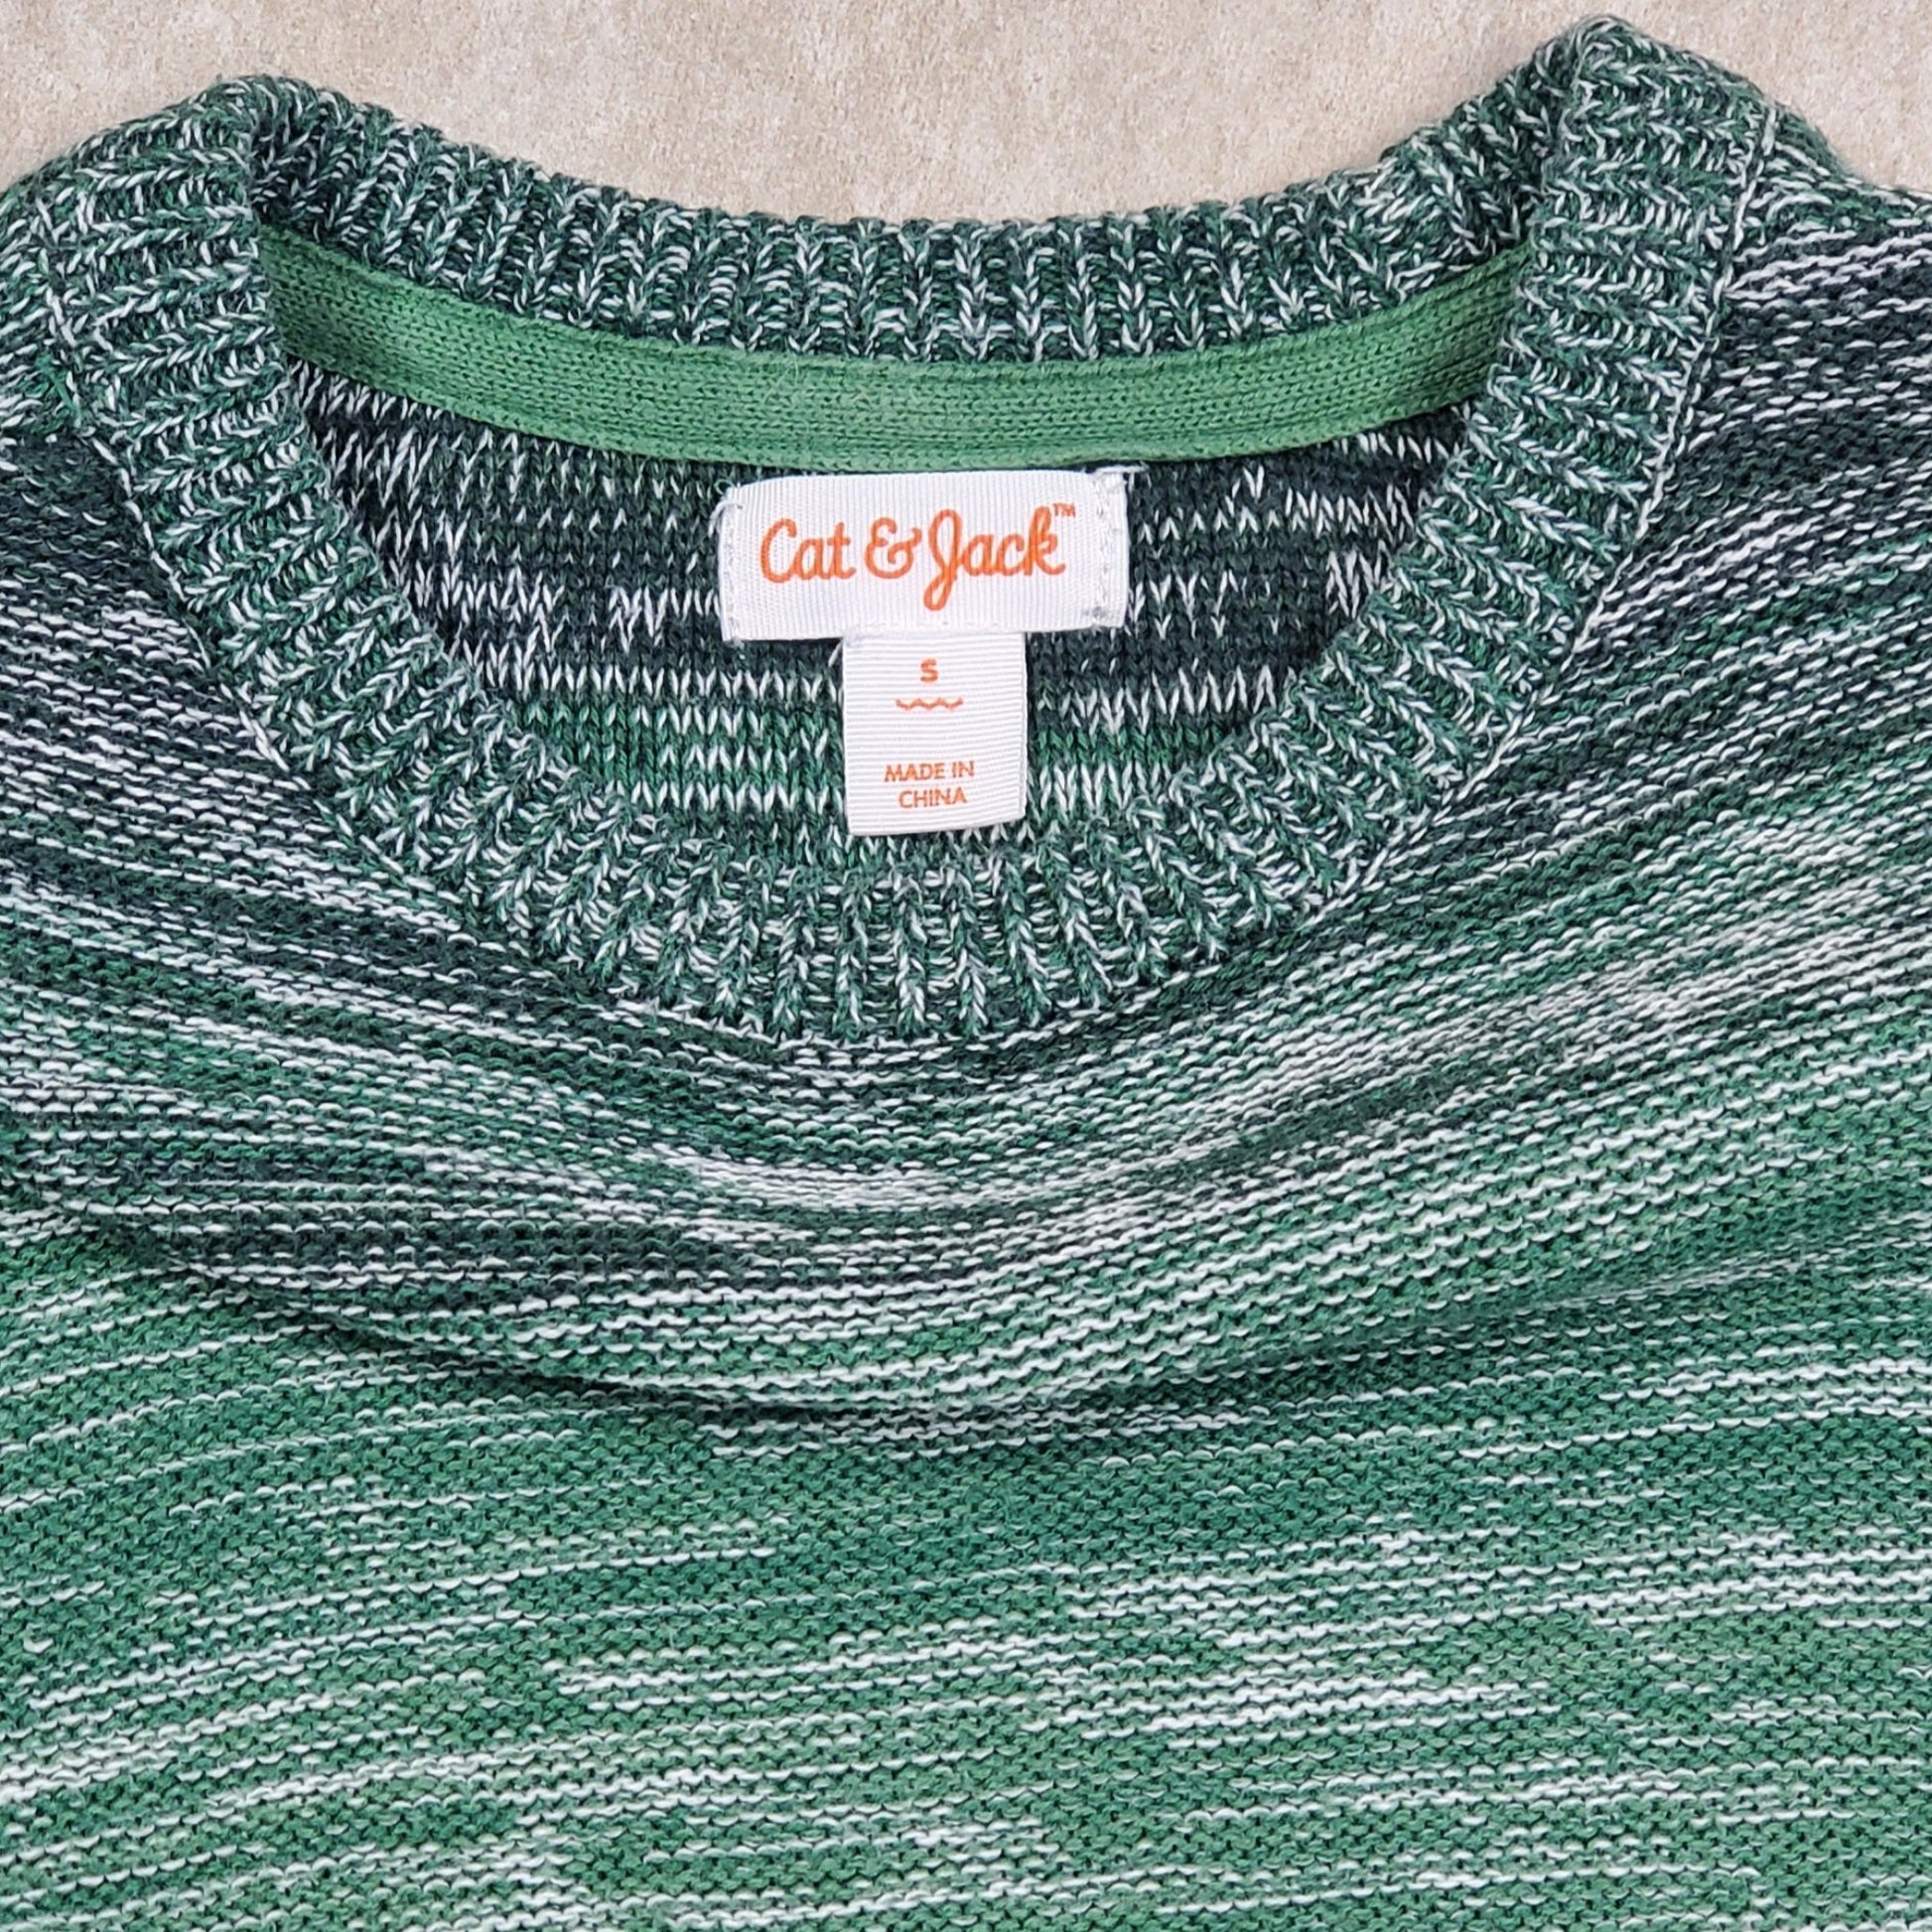 Cat Jack Boys Green Marl Sweater Size Small Used View 3